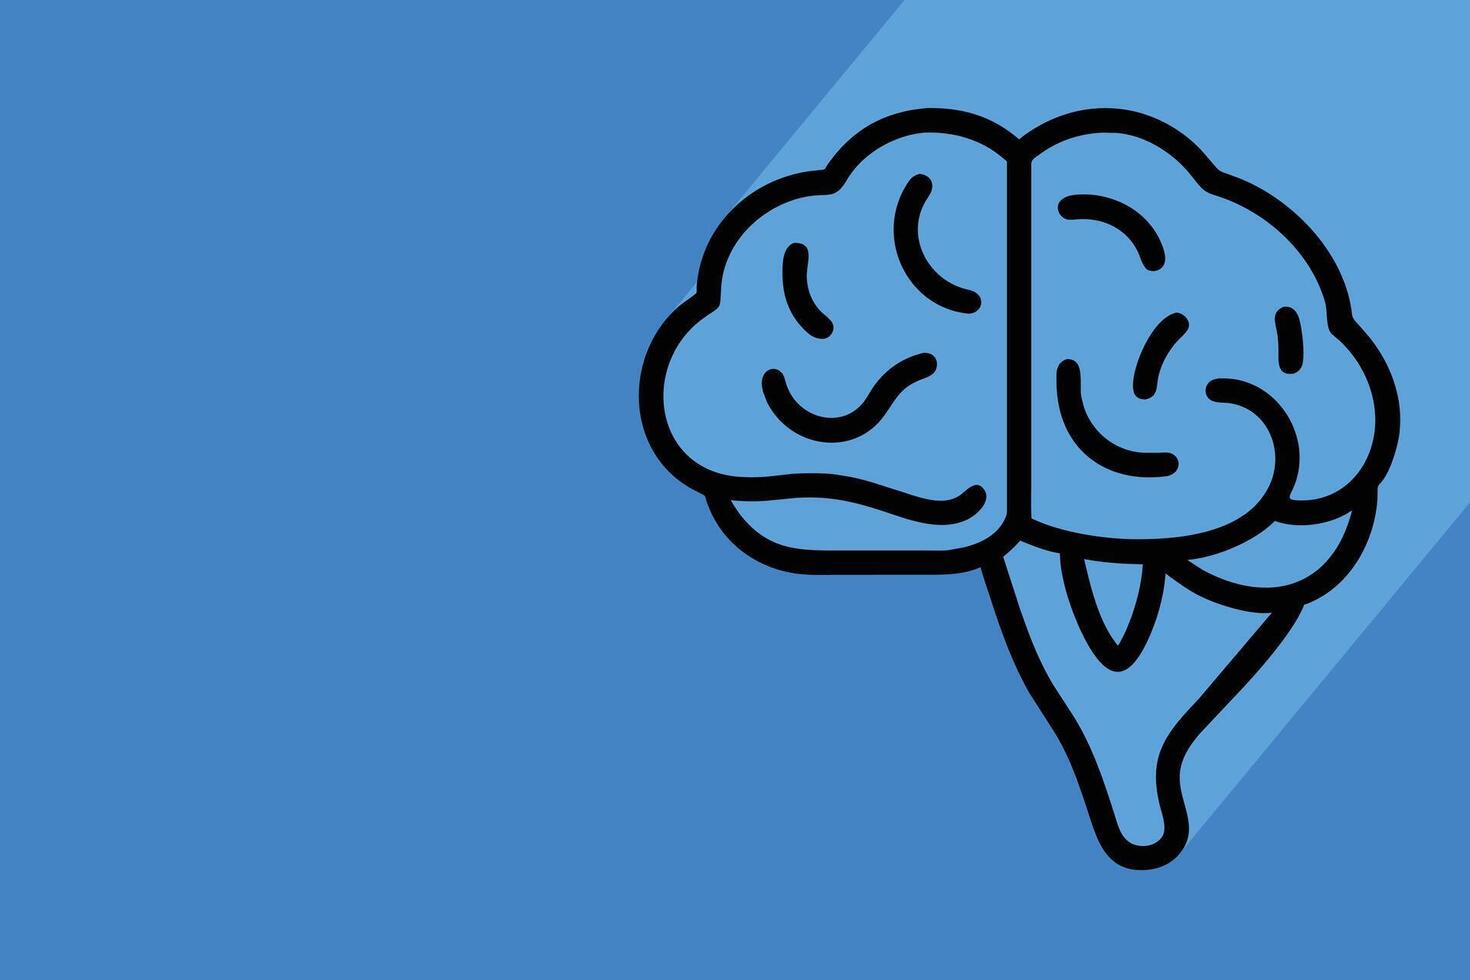 brain graph on blue background vector